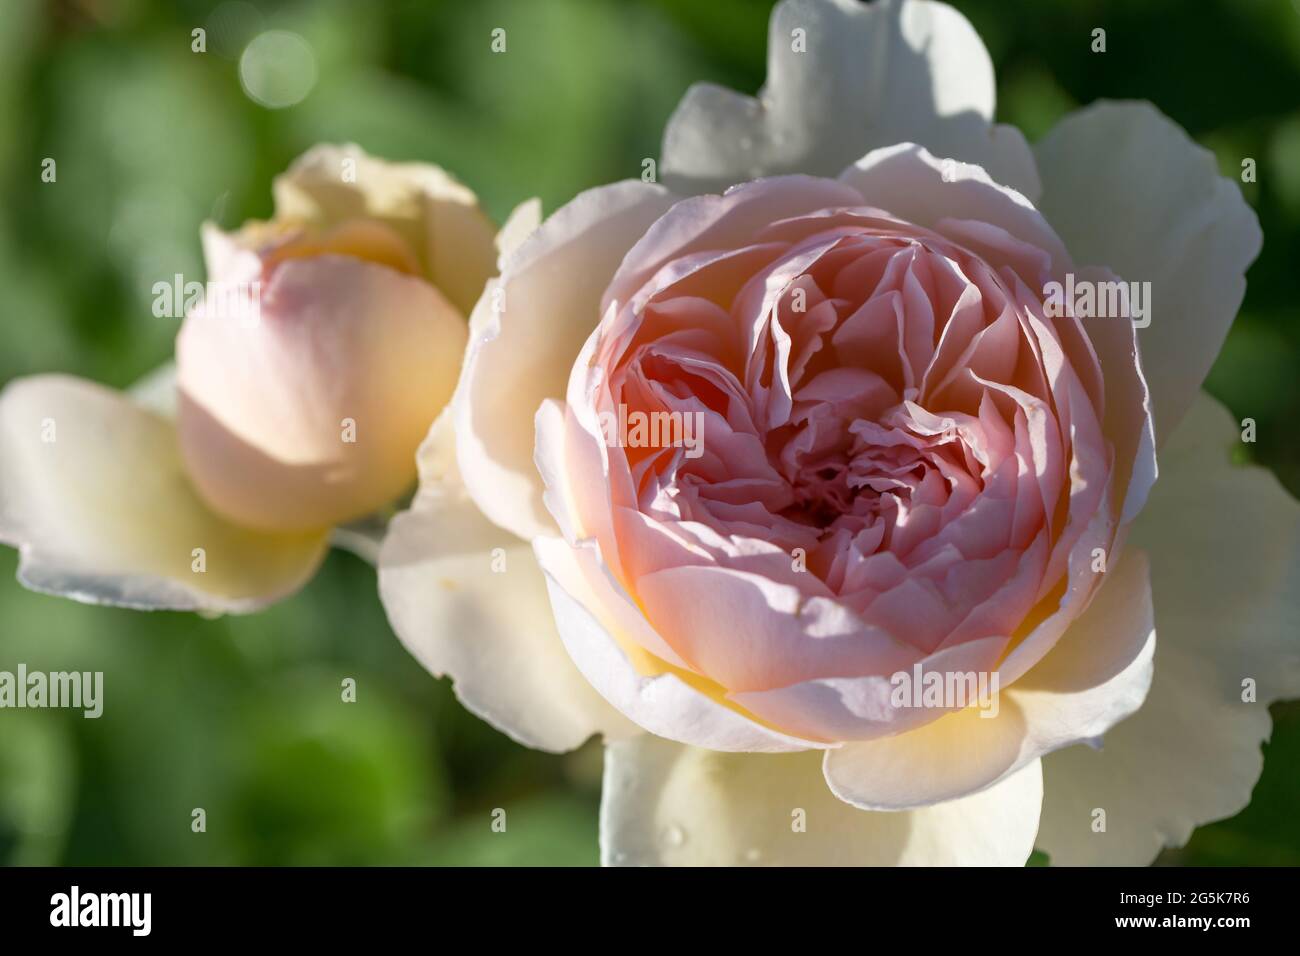 Blooming rose in the garden on a sunny day. Stock Photo